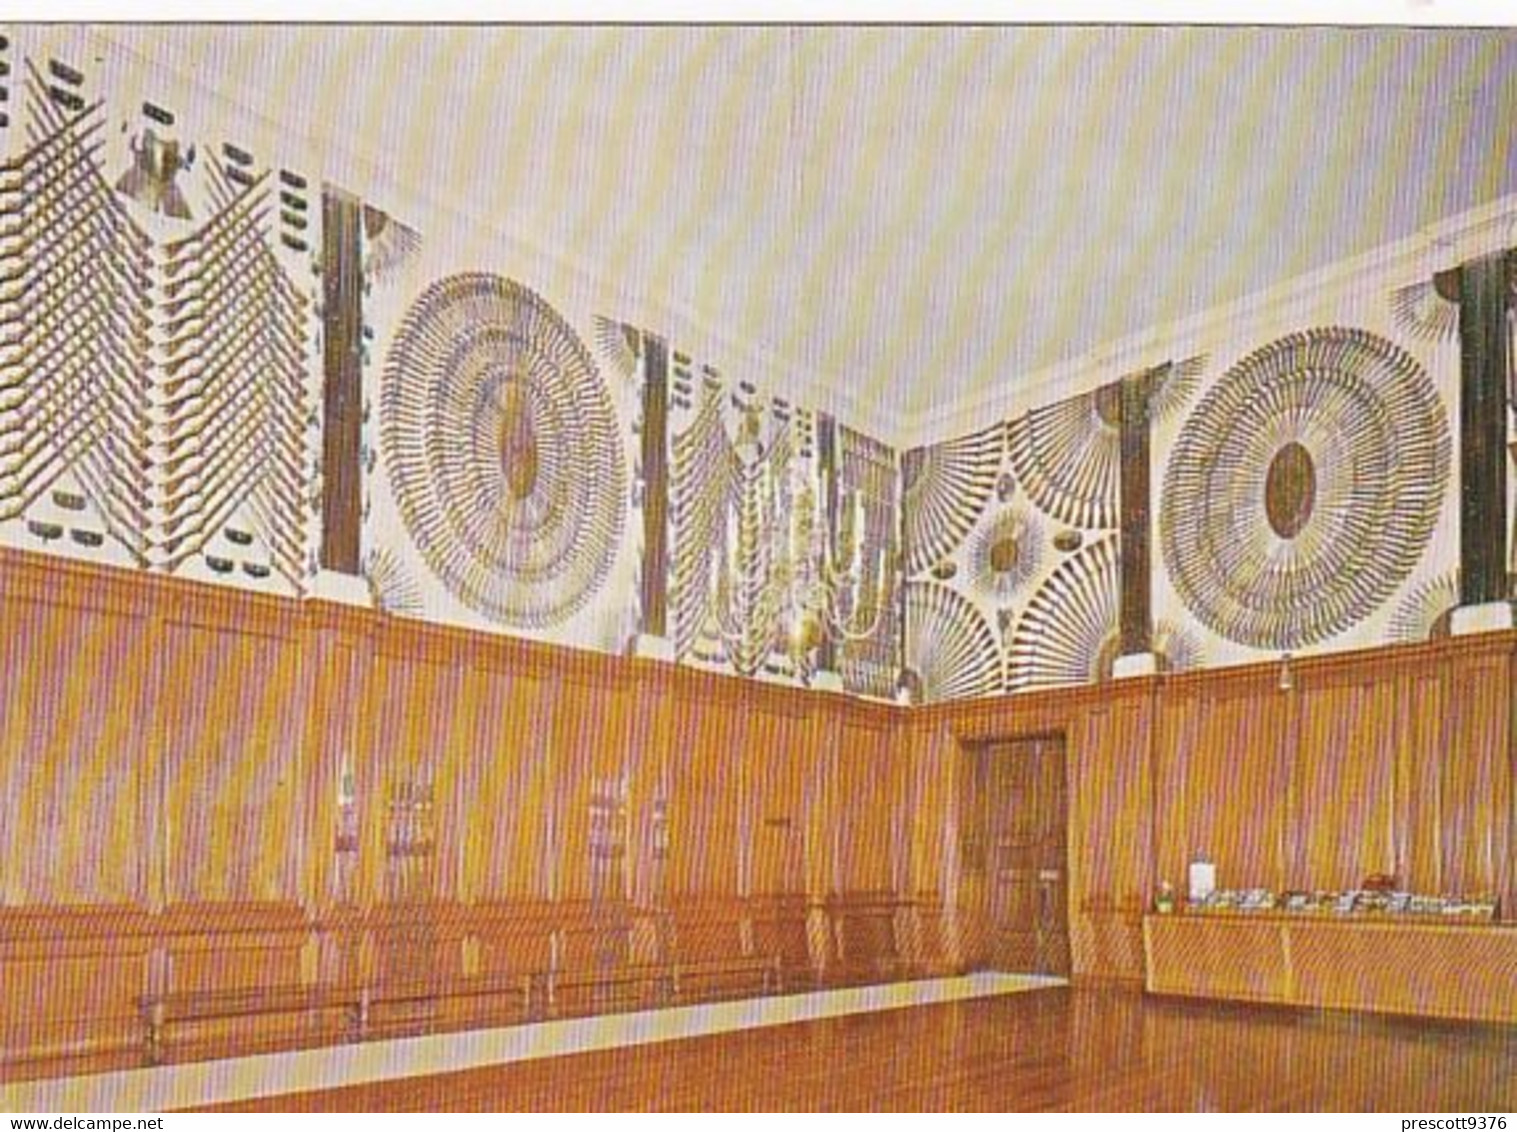 Hampton Court Palace, Kings Guard Room - Unused Postcard - Middlesex - Middlesex